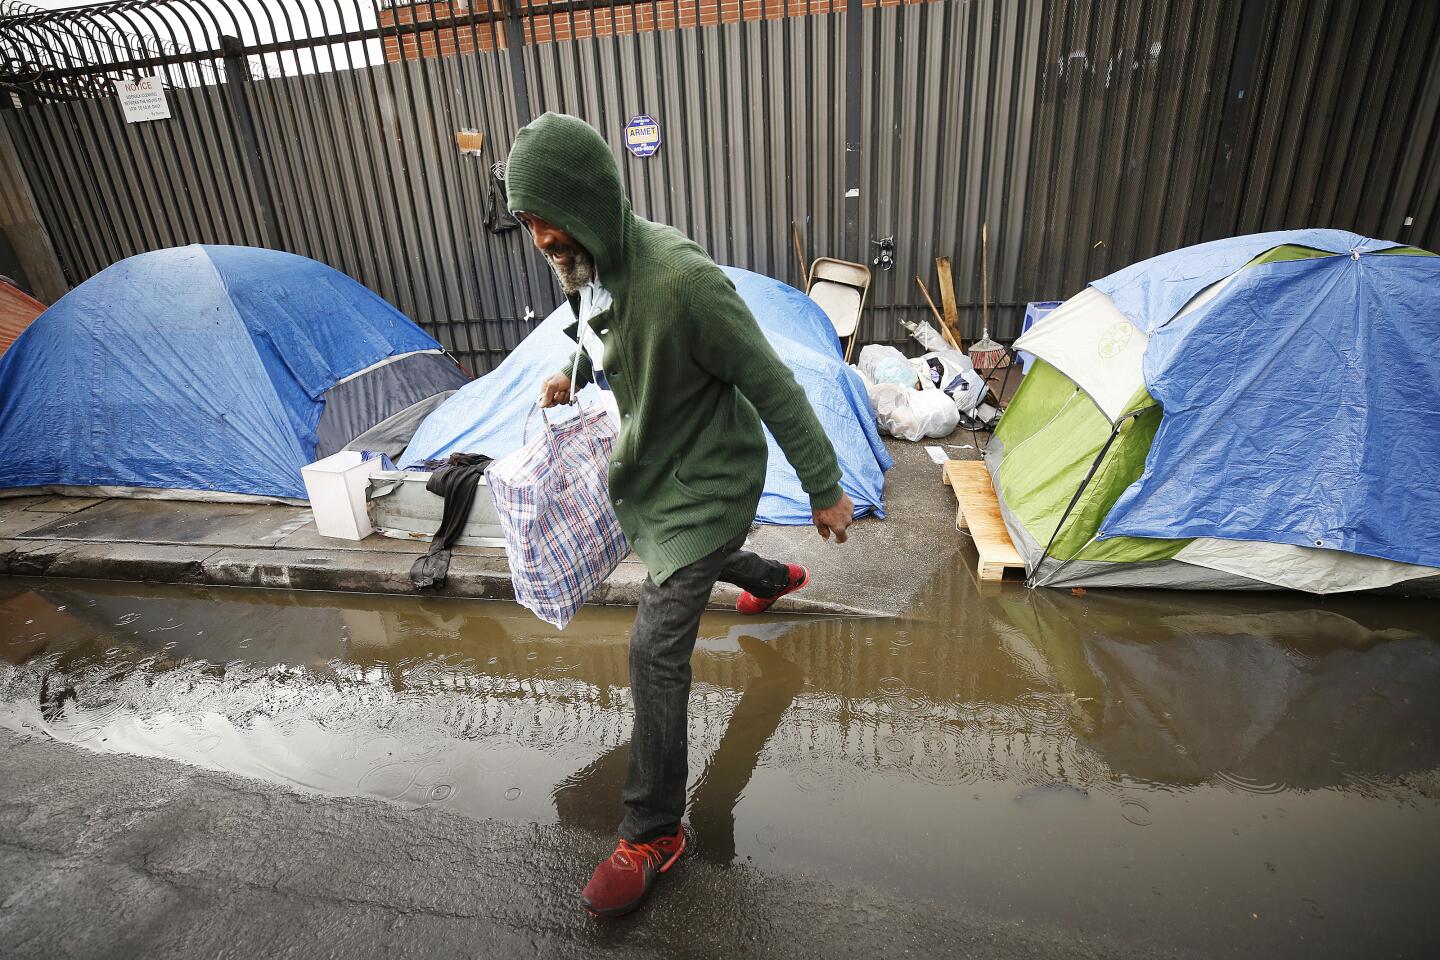 John Gunn leaps over the water at his tent in Skid Row where his belongings were soaked as rain and hail fall in downtown Los Angeles, Wednesday.